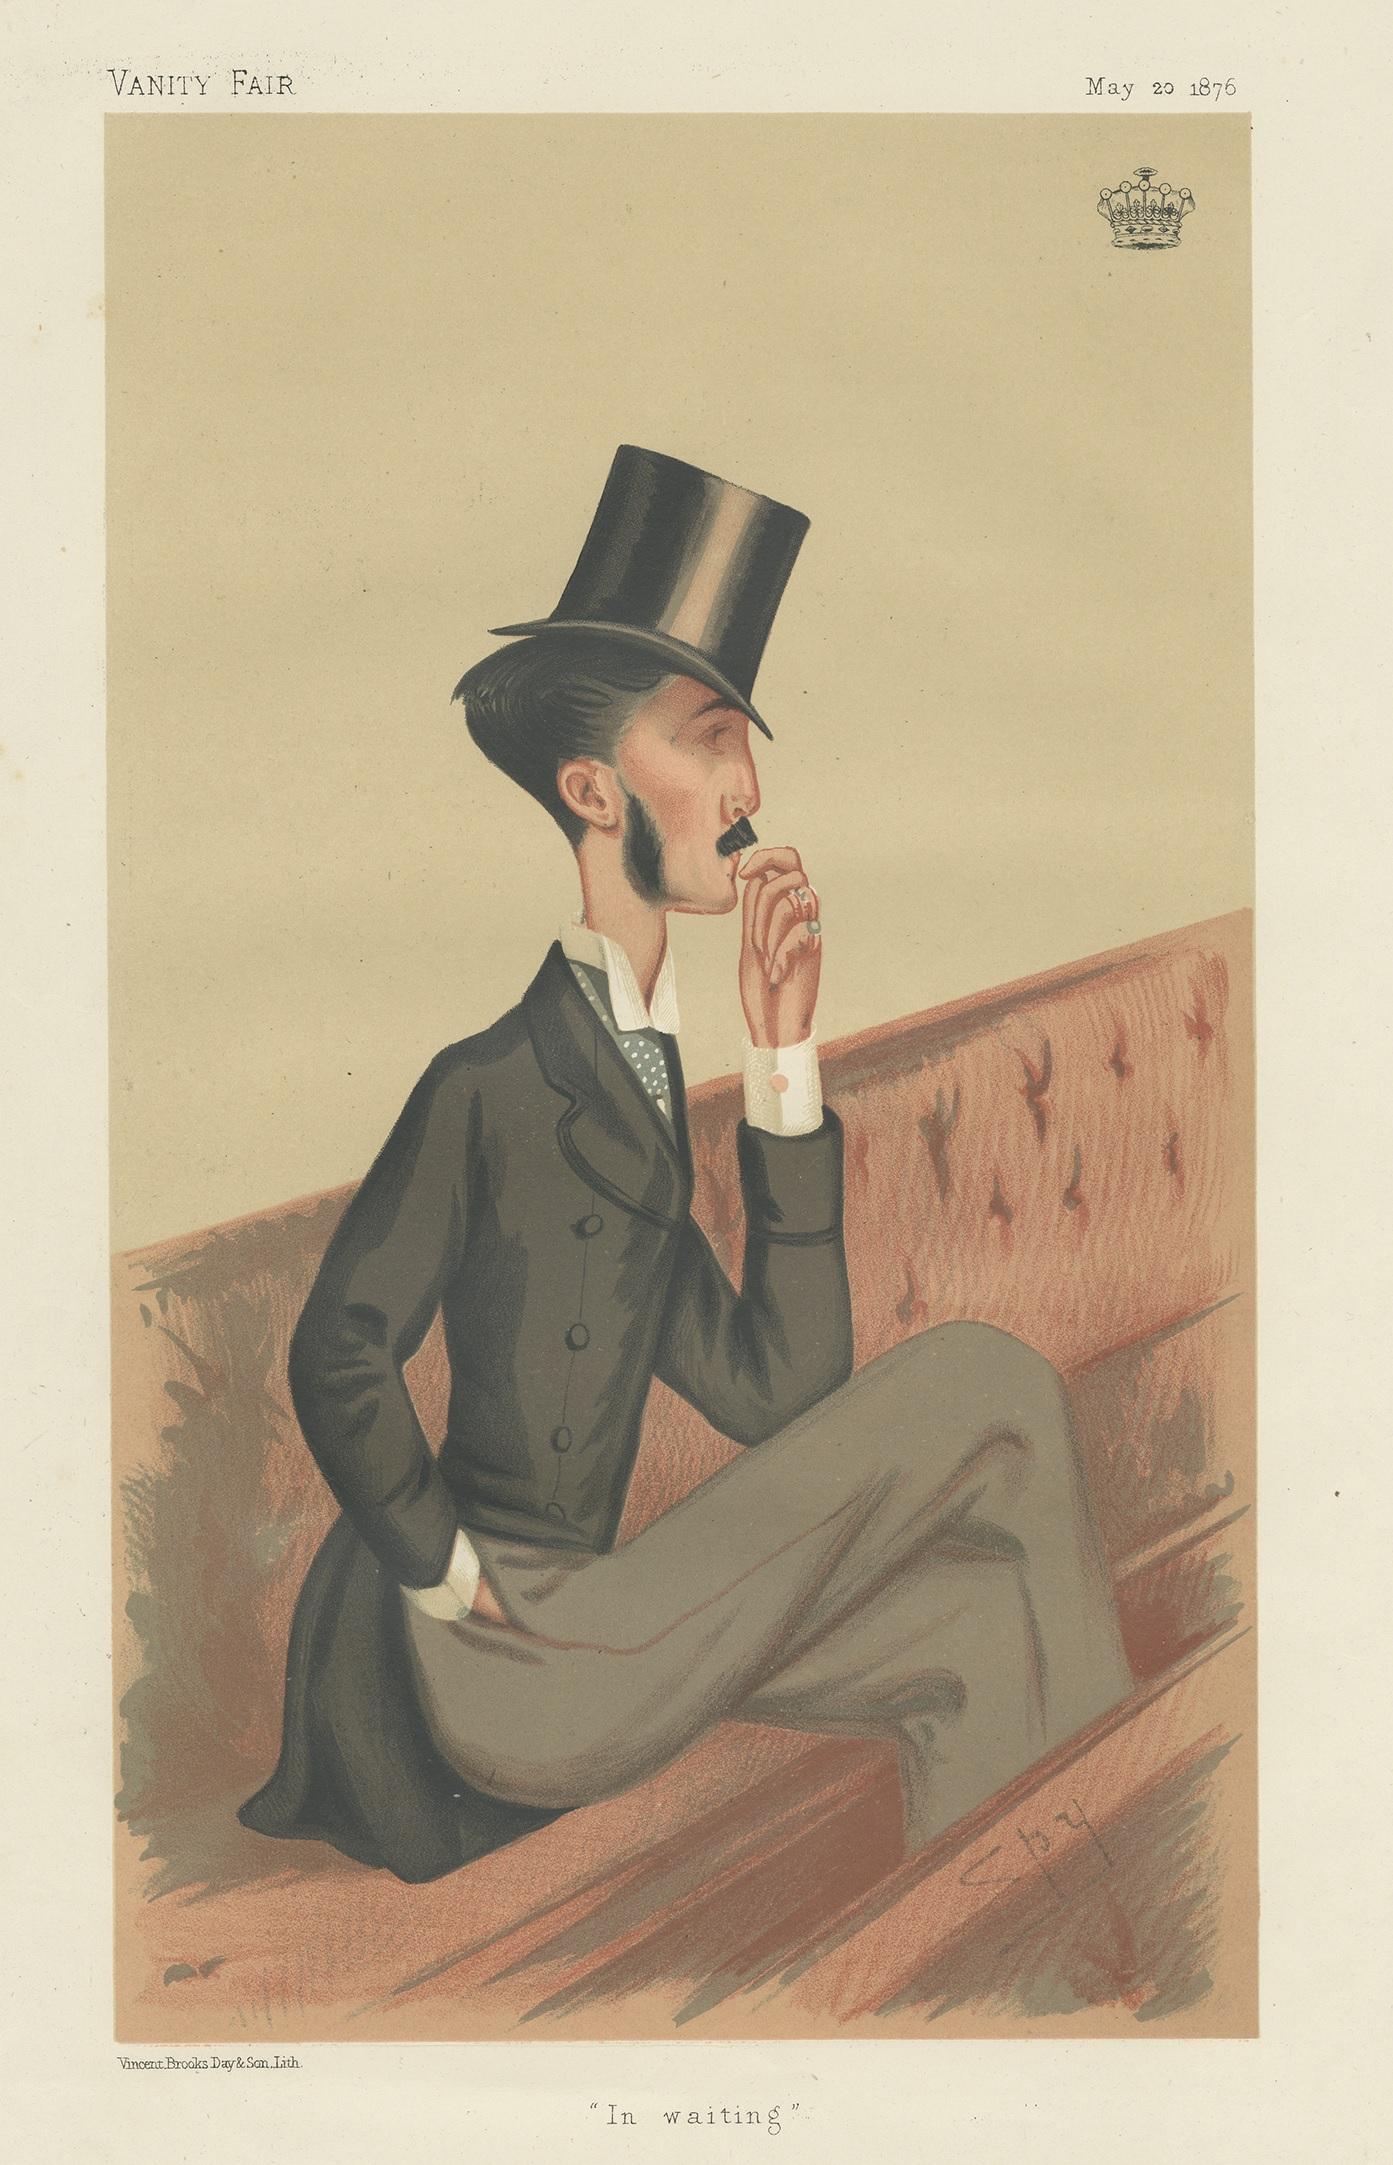 Antique print titled 'In Waiting'. Robert Jocelyn, 4th Earl of Roden (22 November 1846-10 January 1880), styled The Honourable Robert Jocelyn until 1854 and Viscount Jocelyn from 1854-1870, was an Anglo-Irish conservative politician. This caricature